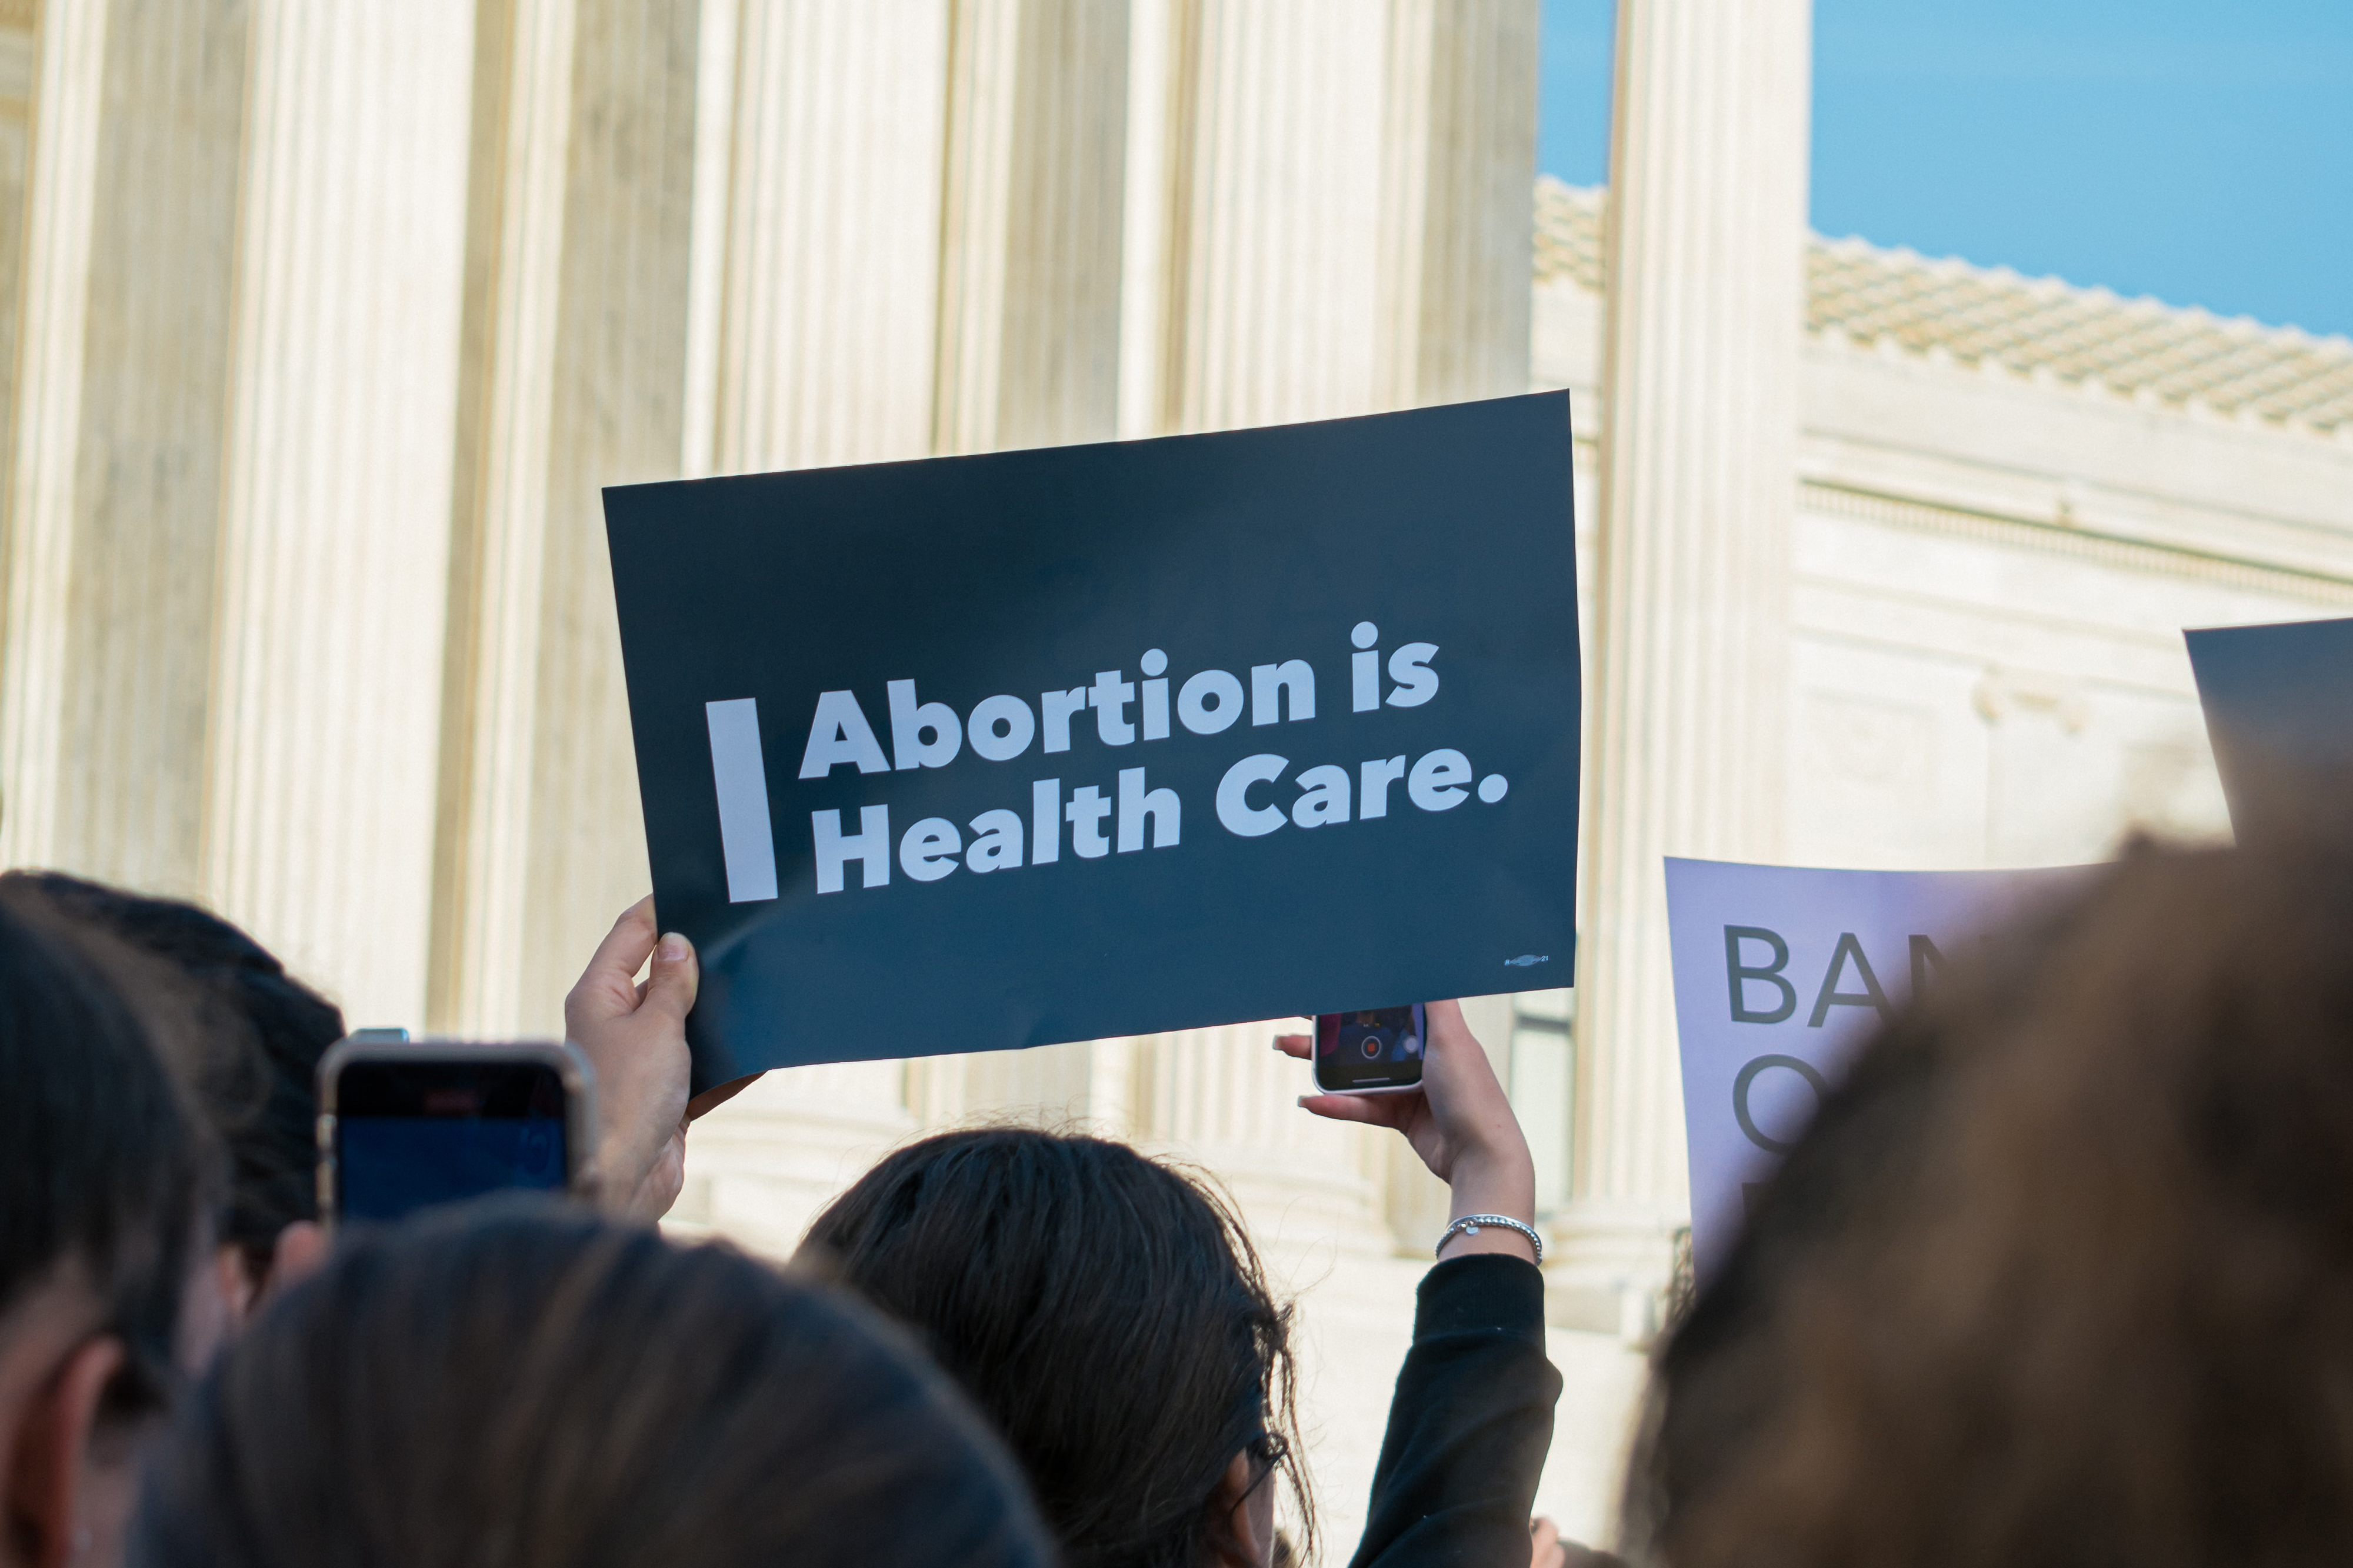 Image of a person holding a sign with text that says ABORTION IS HEALTH CARE